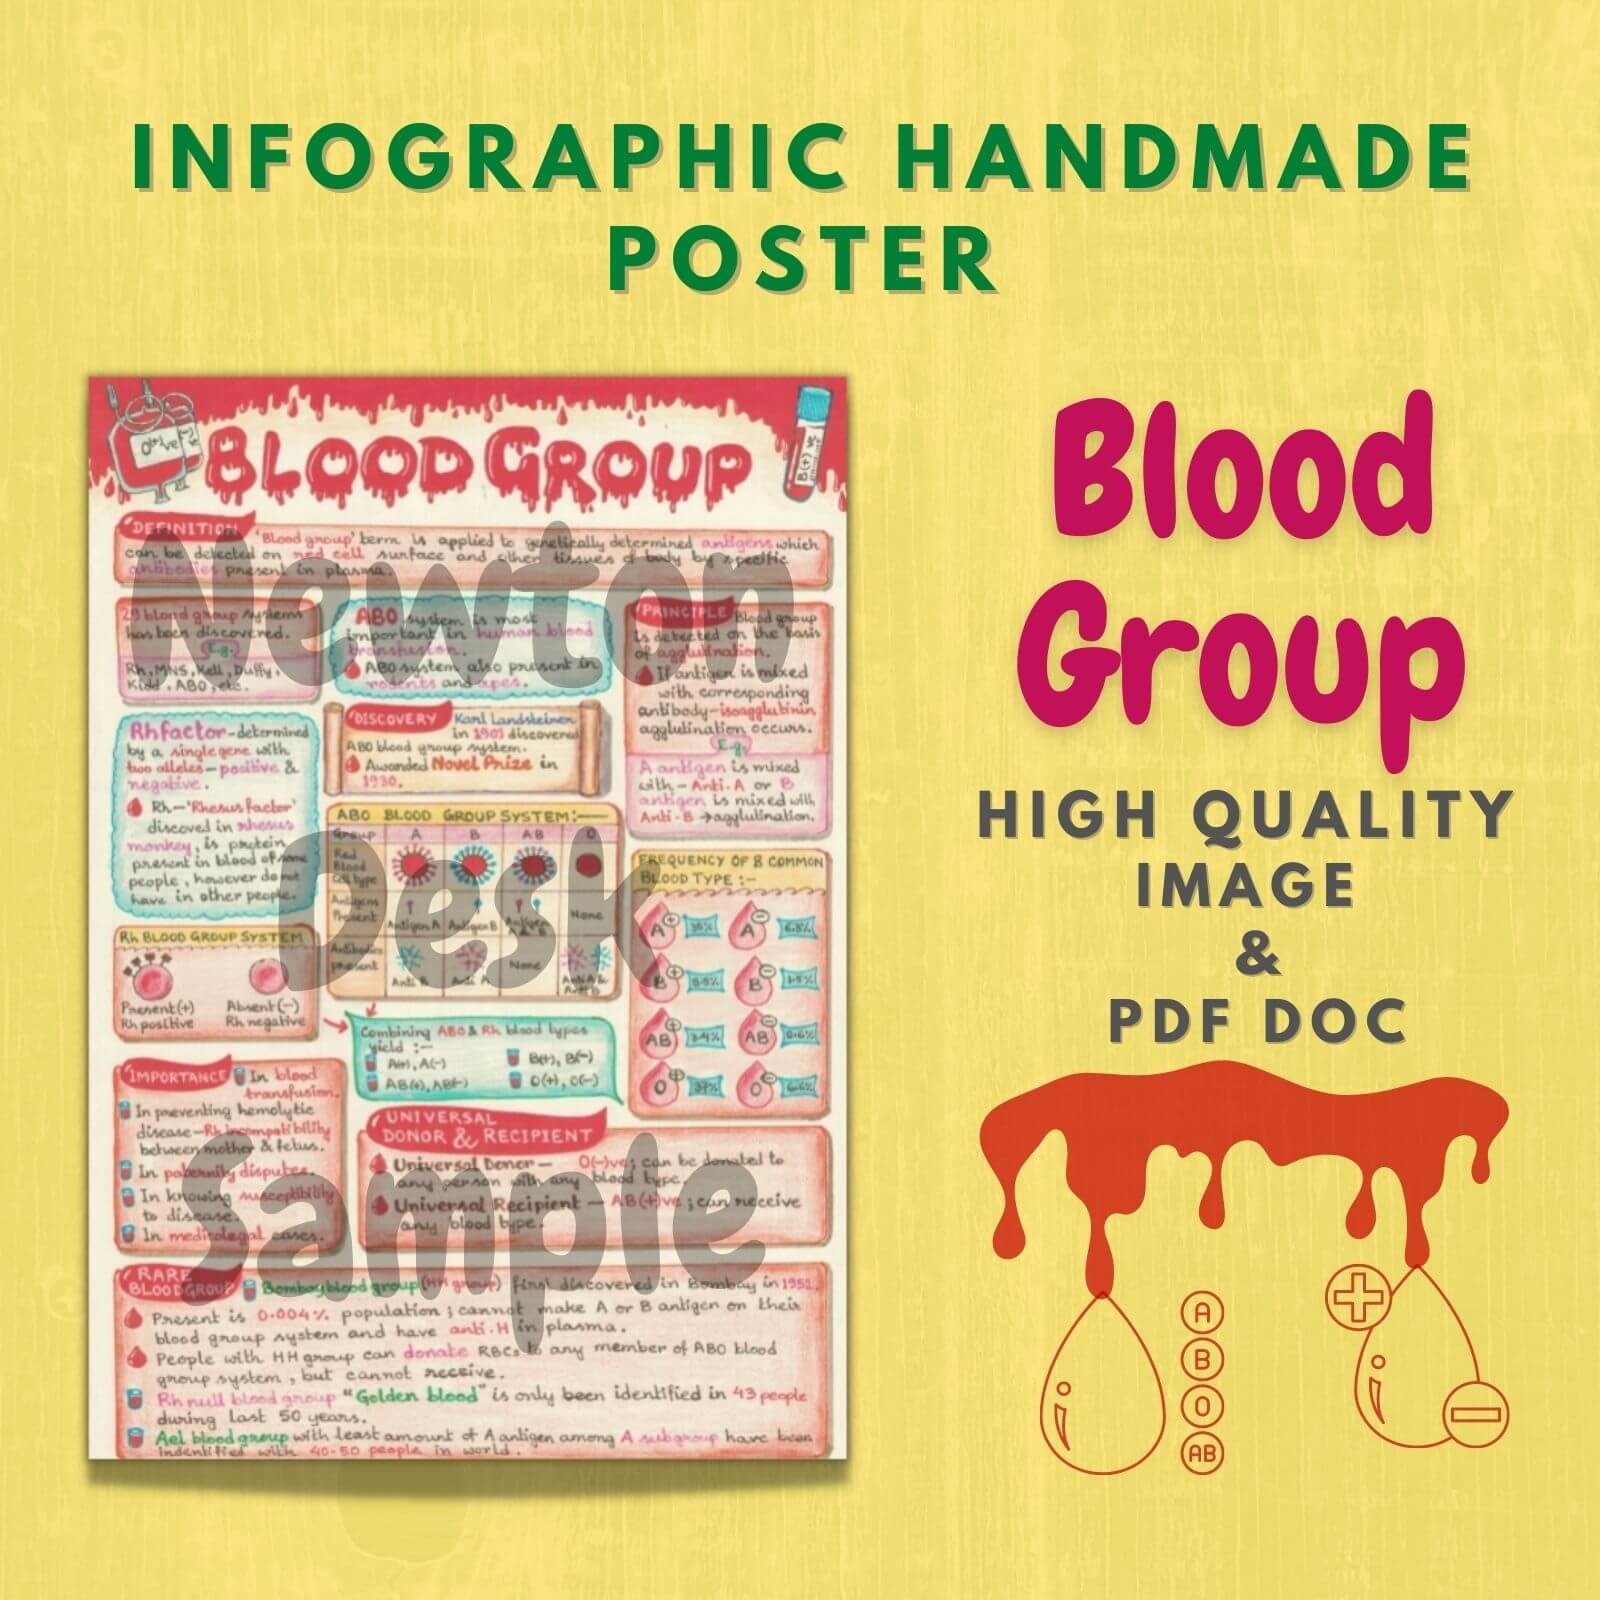 blood group infographic aesthetic poster image in pdf